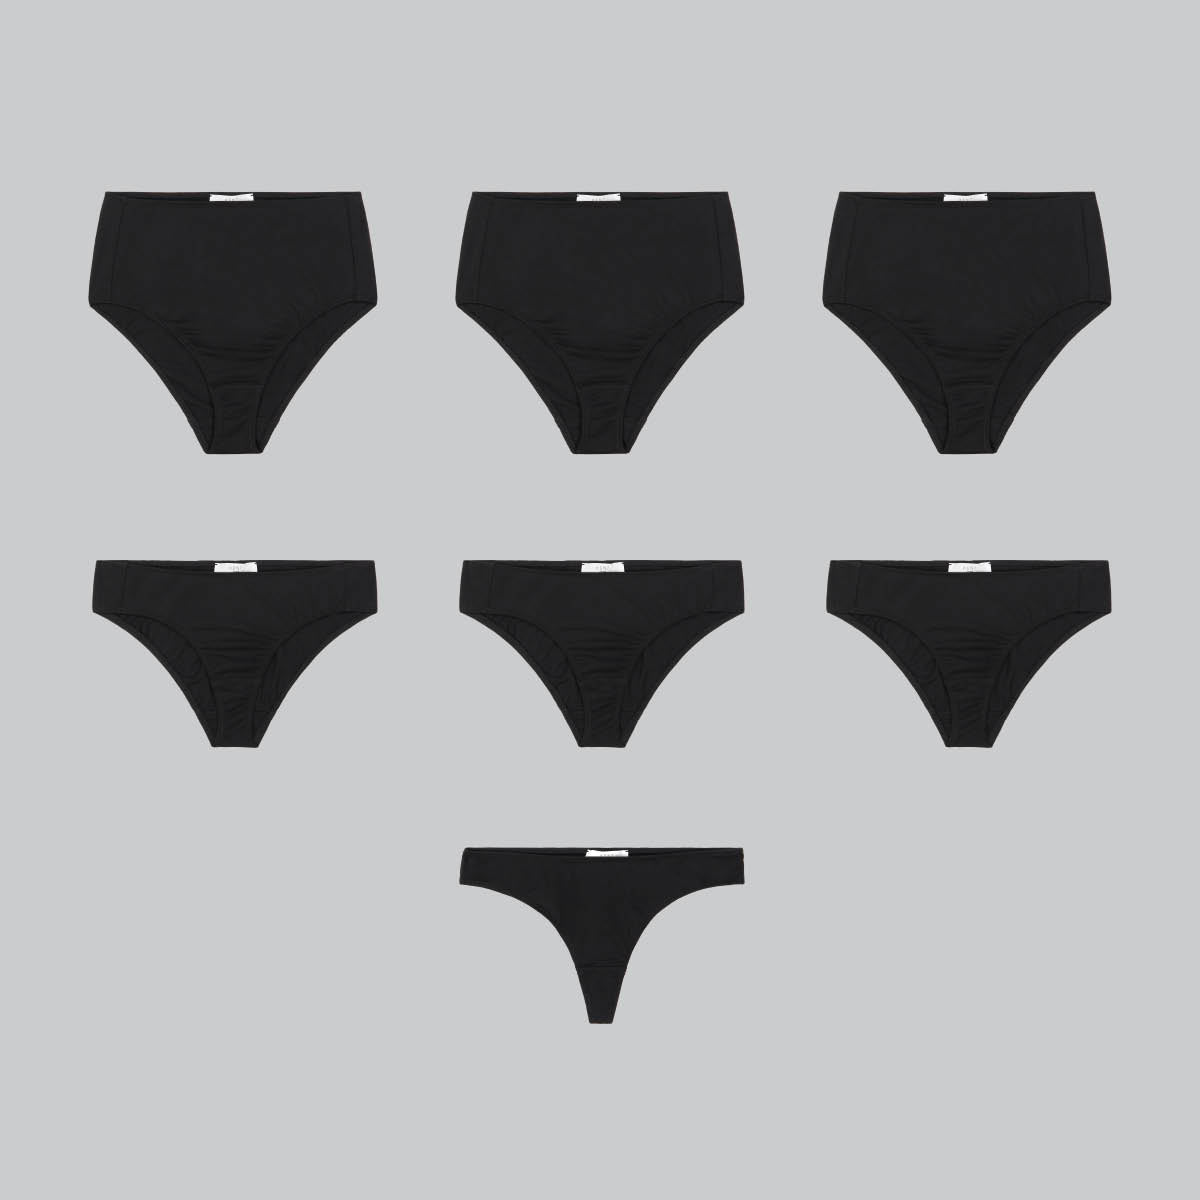 The Annual Brief - 100% Organic Underwear on Auto-Pilot by KENT